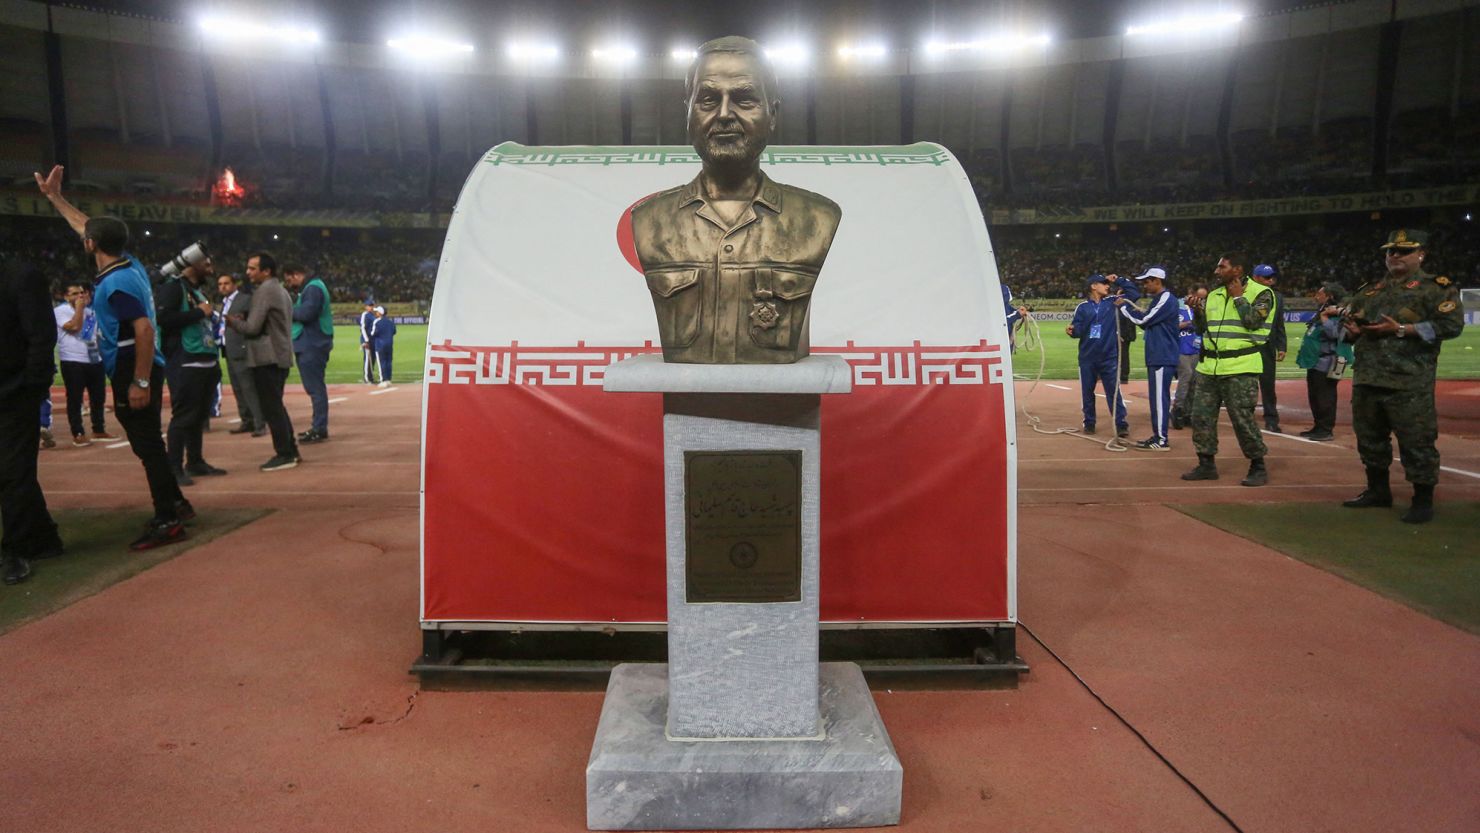 Sepahan: Iranian soccer club punished and fined $200,000 for displaying  slain's commander bust that forced cancelation of match against Saudi team